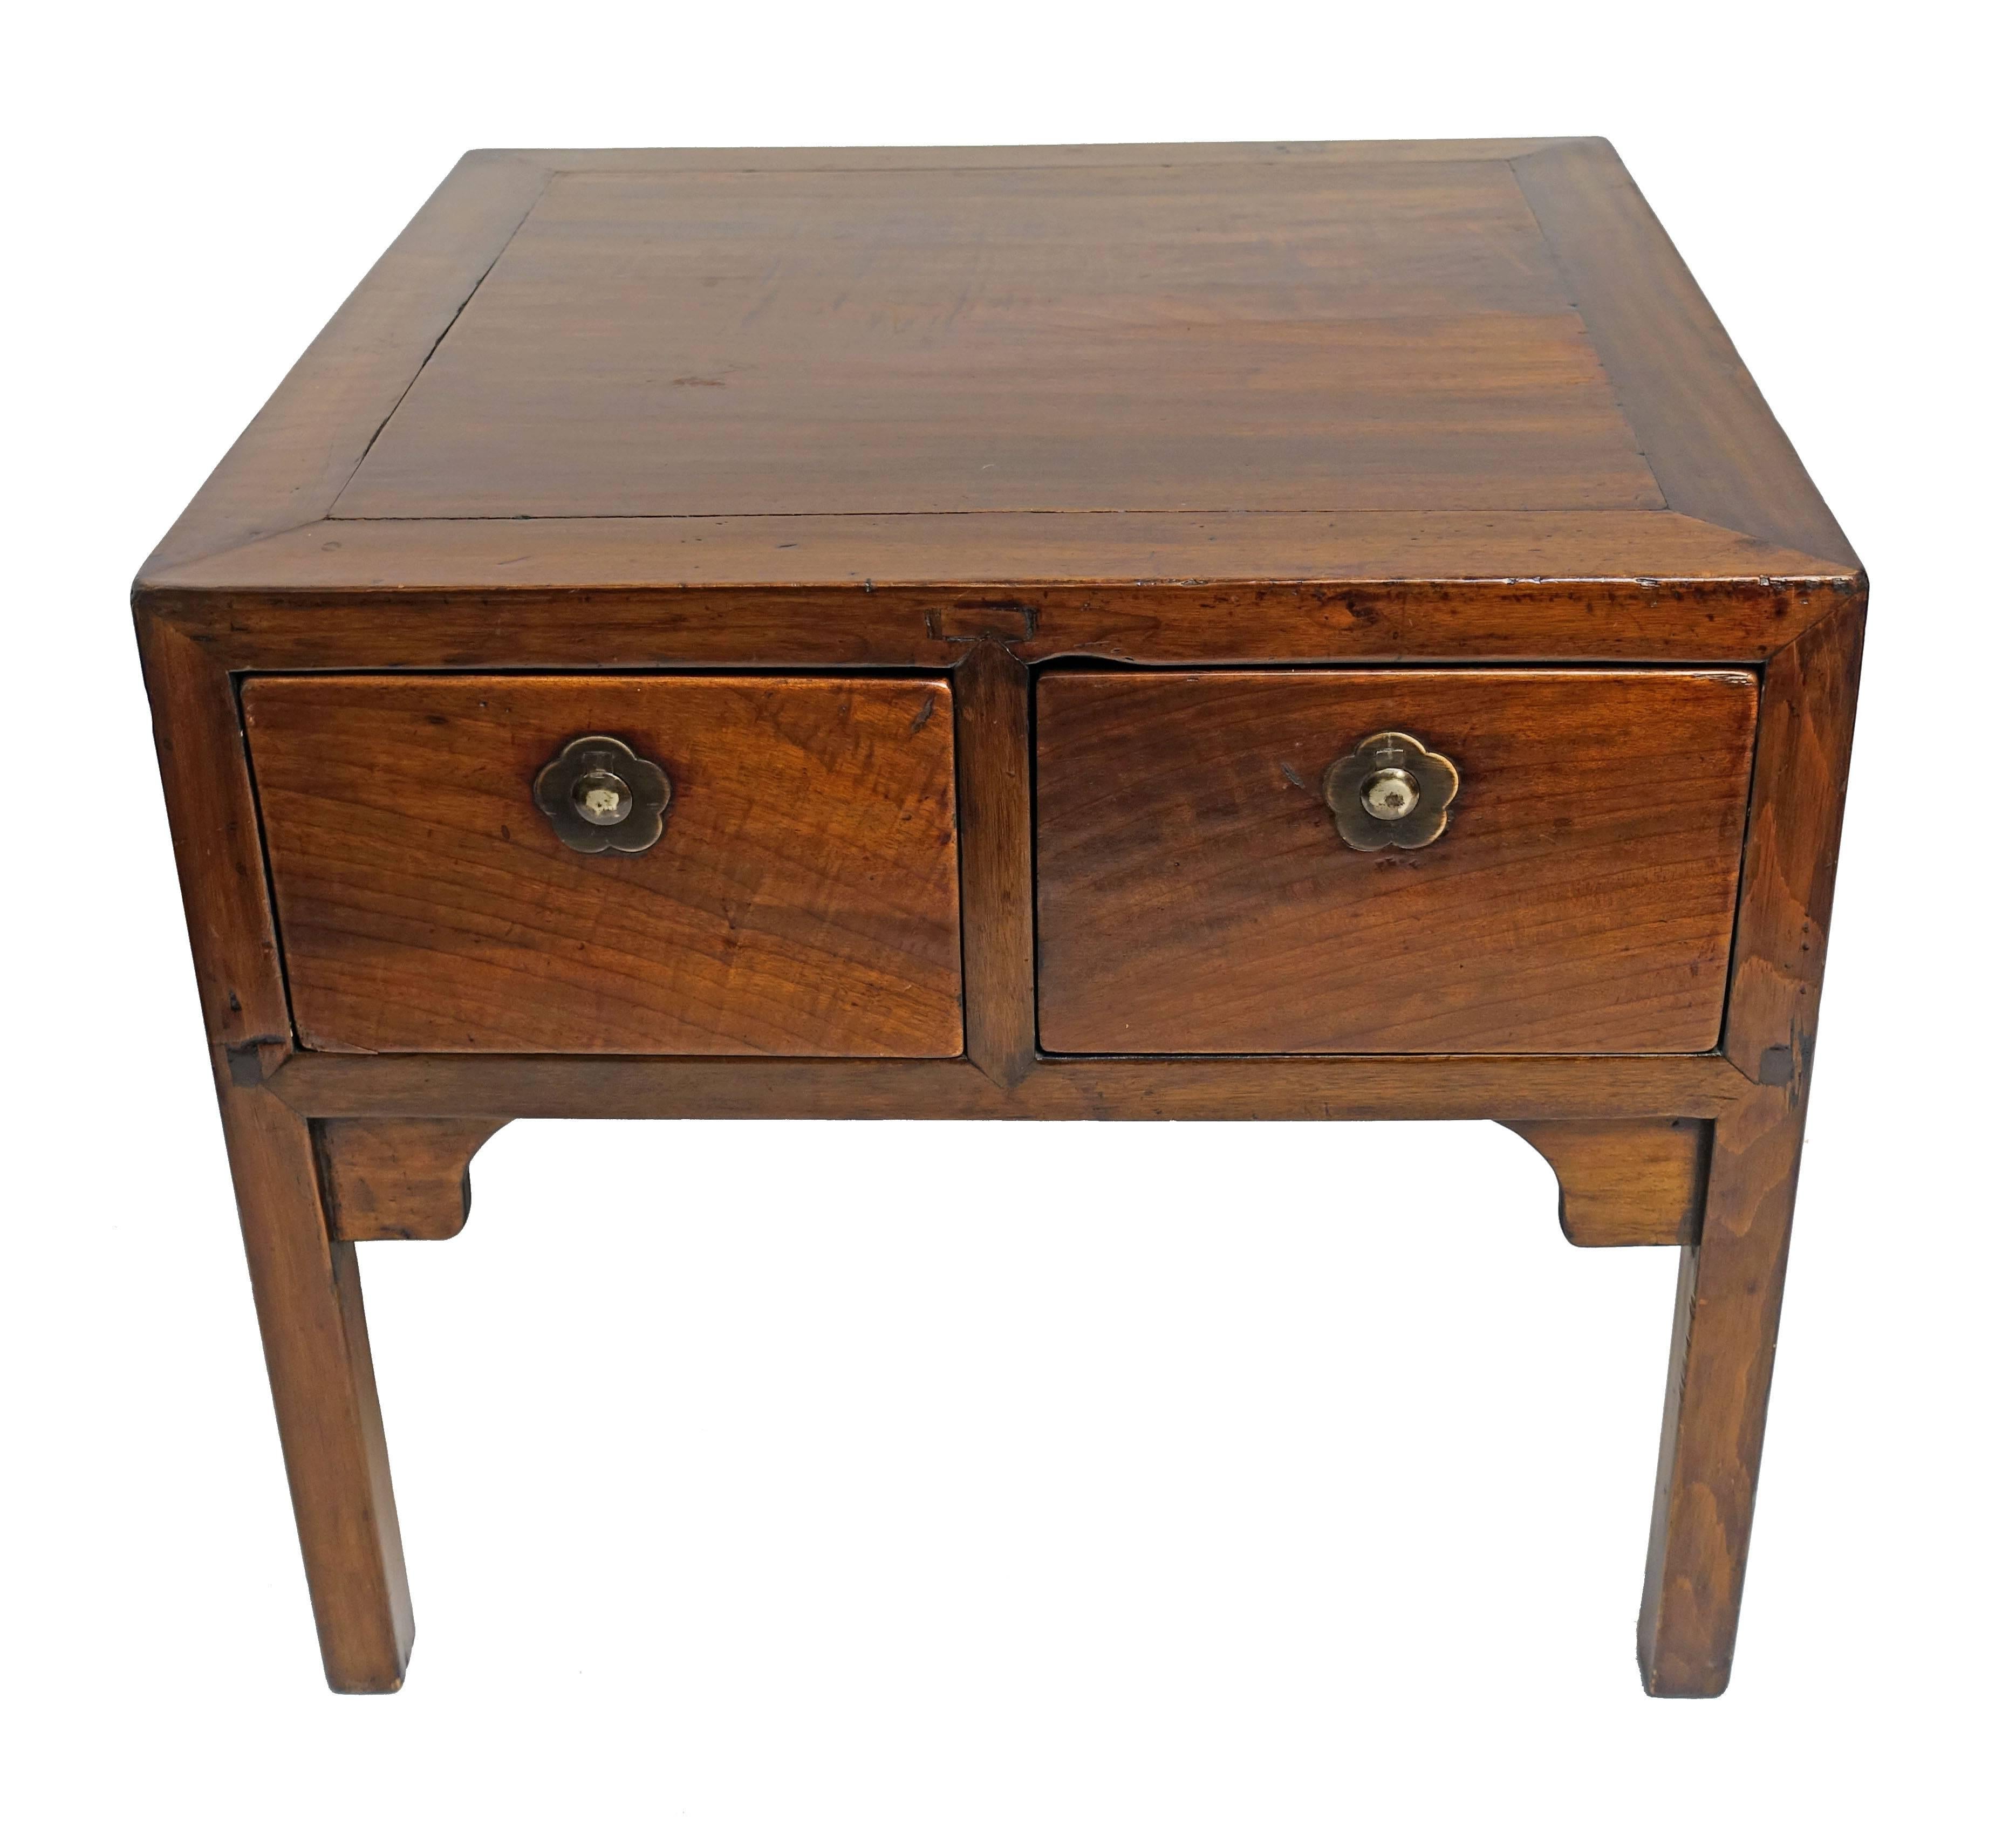 Low side table with two drawers, having unusual brass drawer pulls that lift up revealing a hidden lock. We do not have keys for this table, China, 19th century.